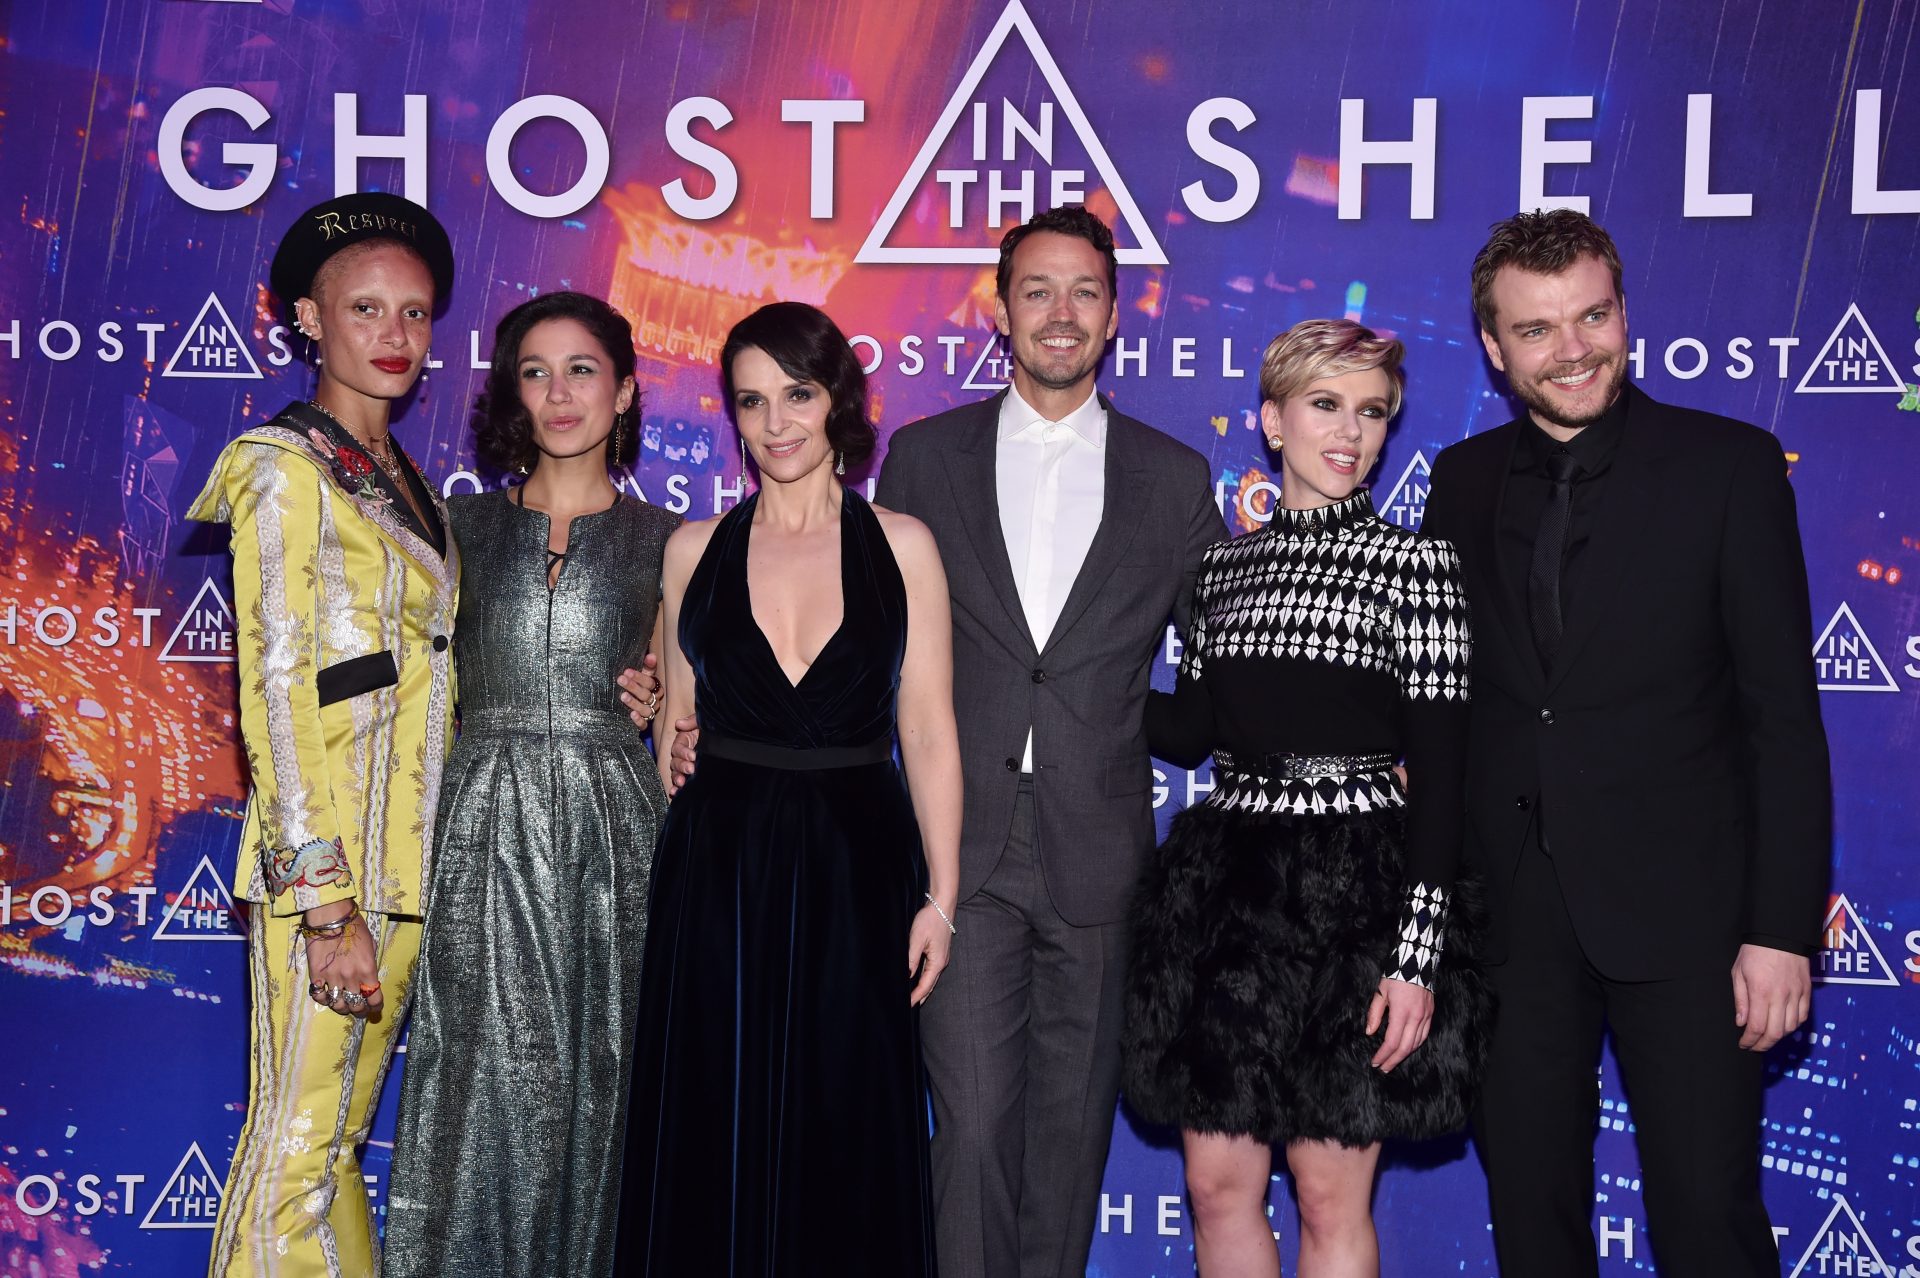 'Ghost in the Shell' sci-fi is all the social media rage